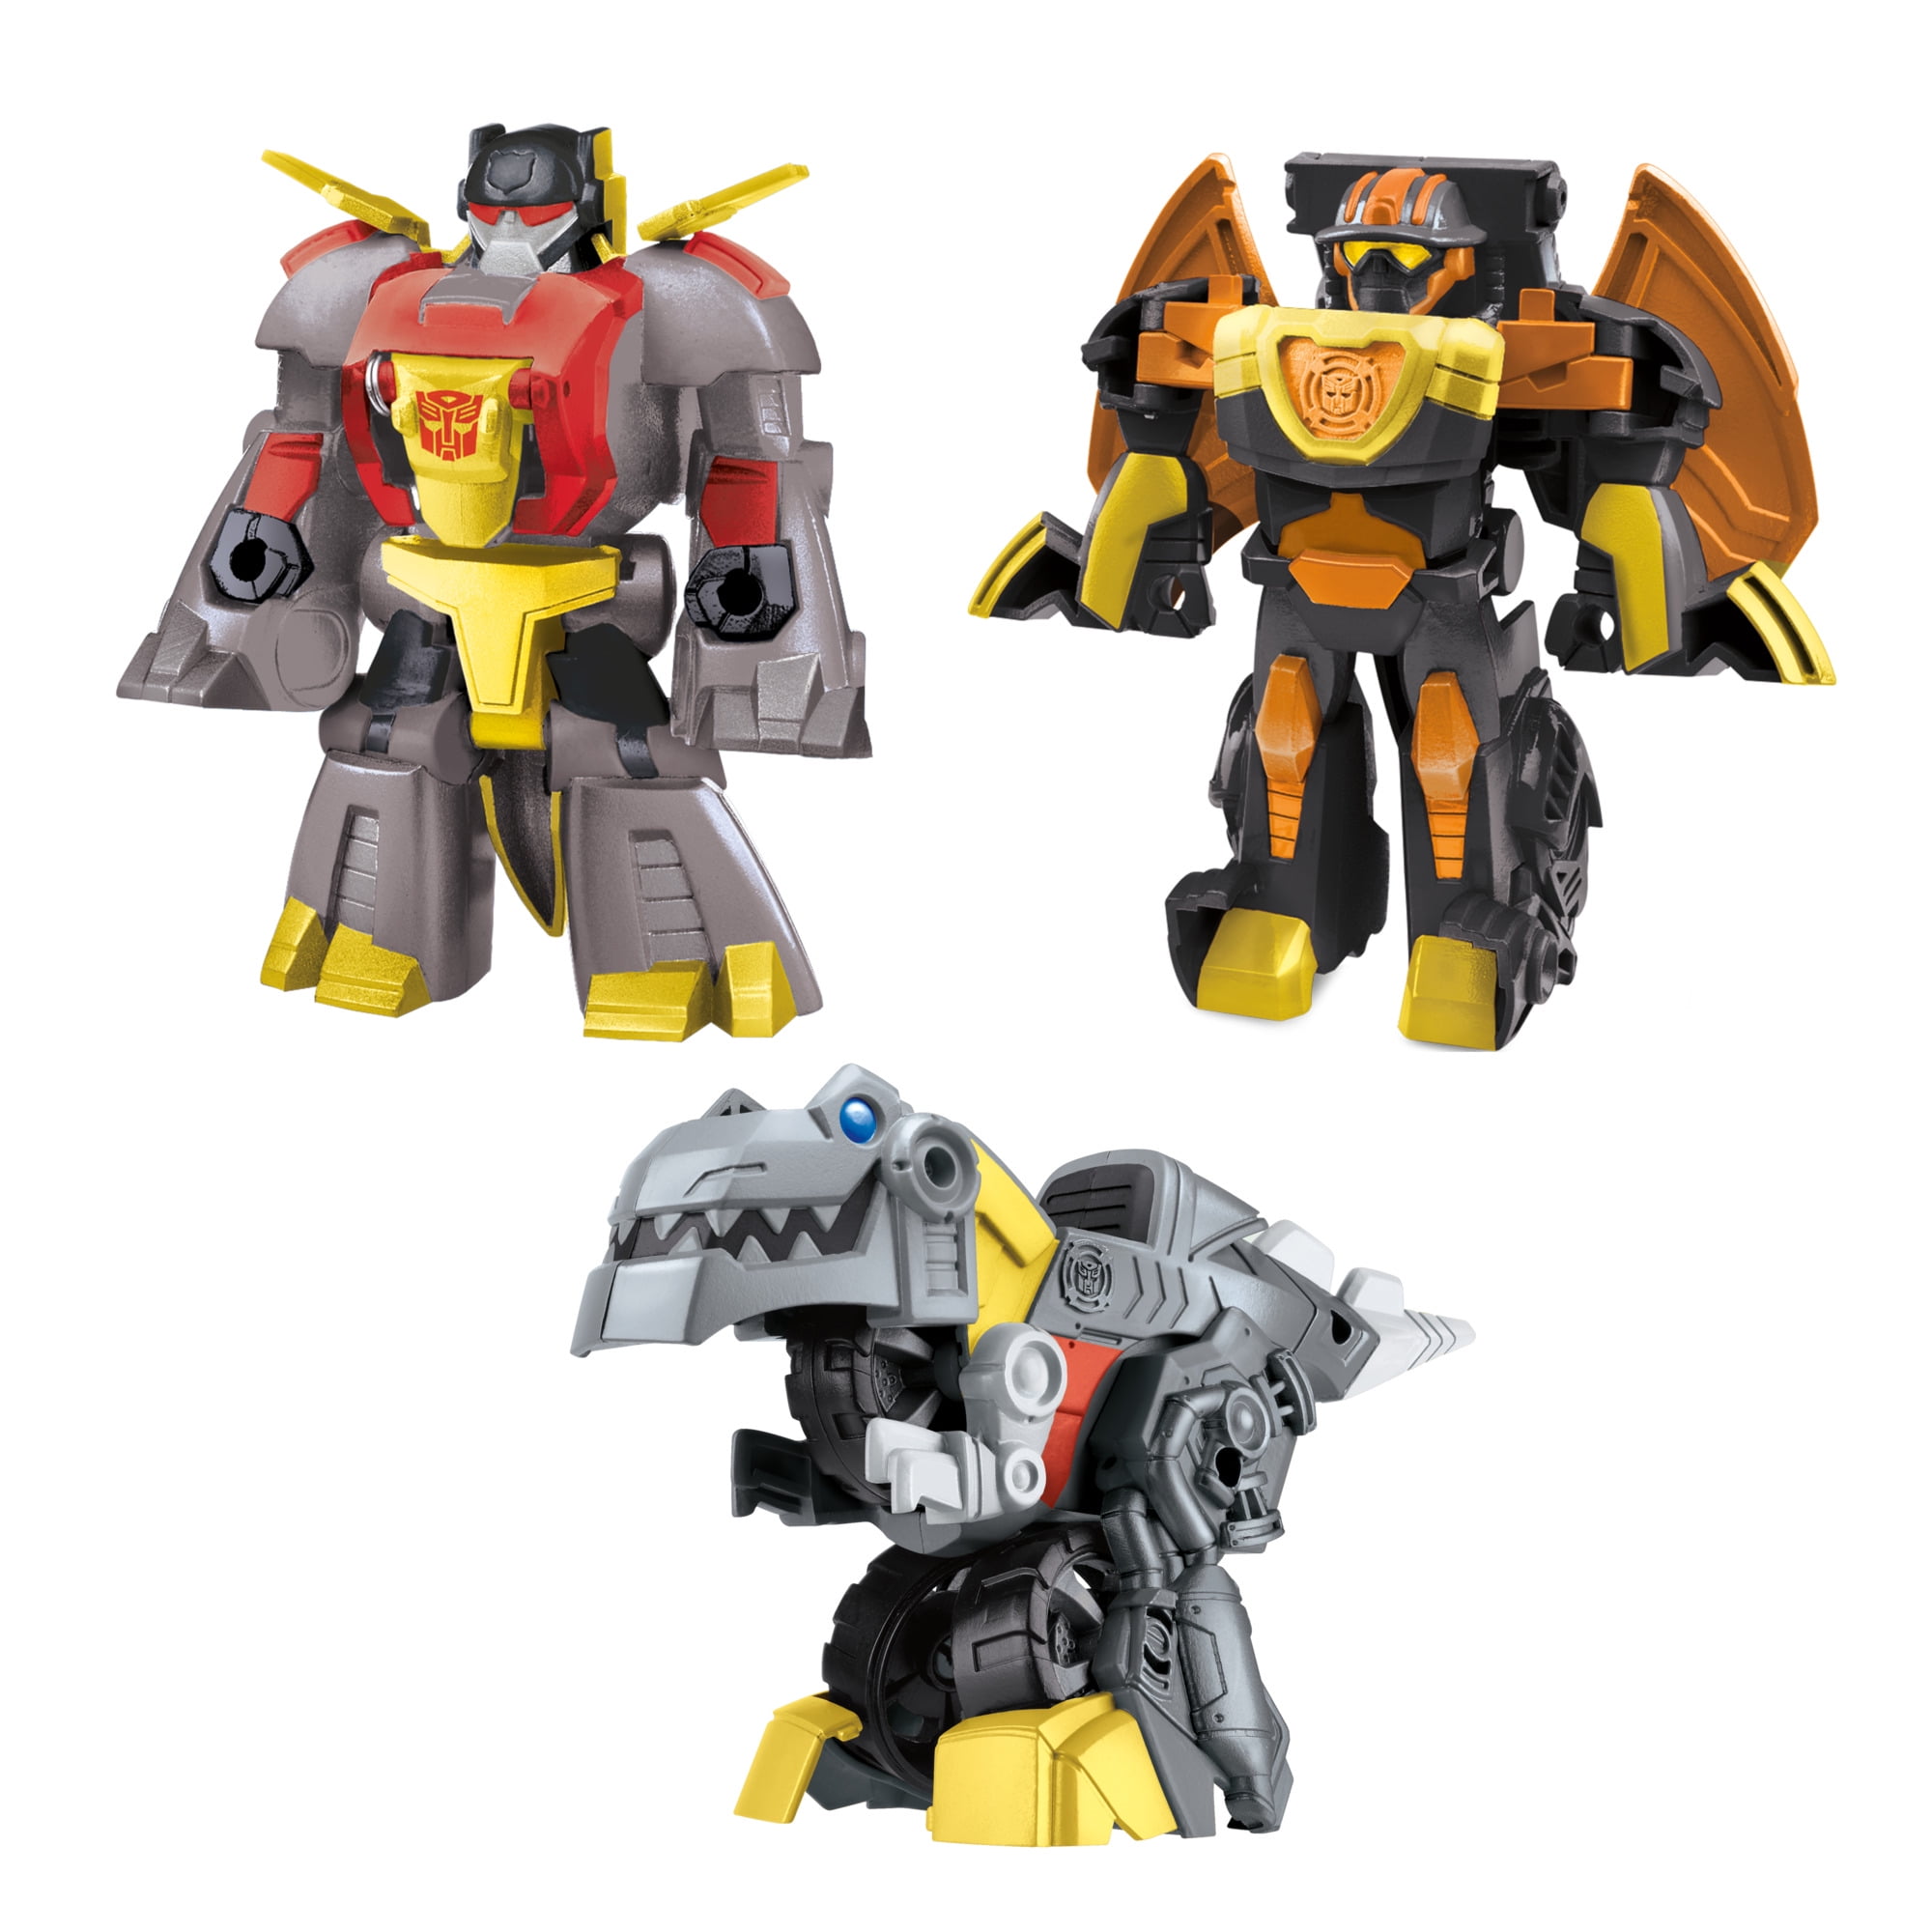 Hasbro Transformers Animated Deluxe Snarl Action Figure for sale online 